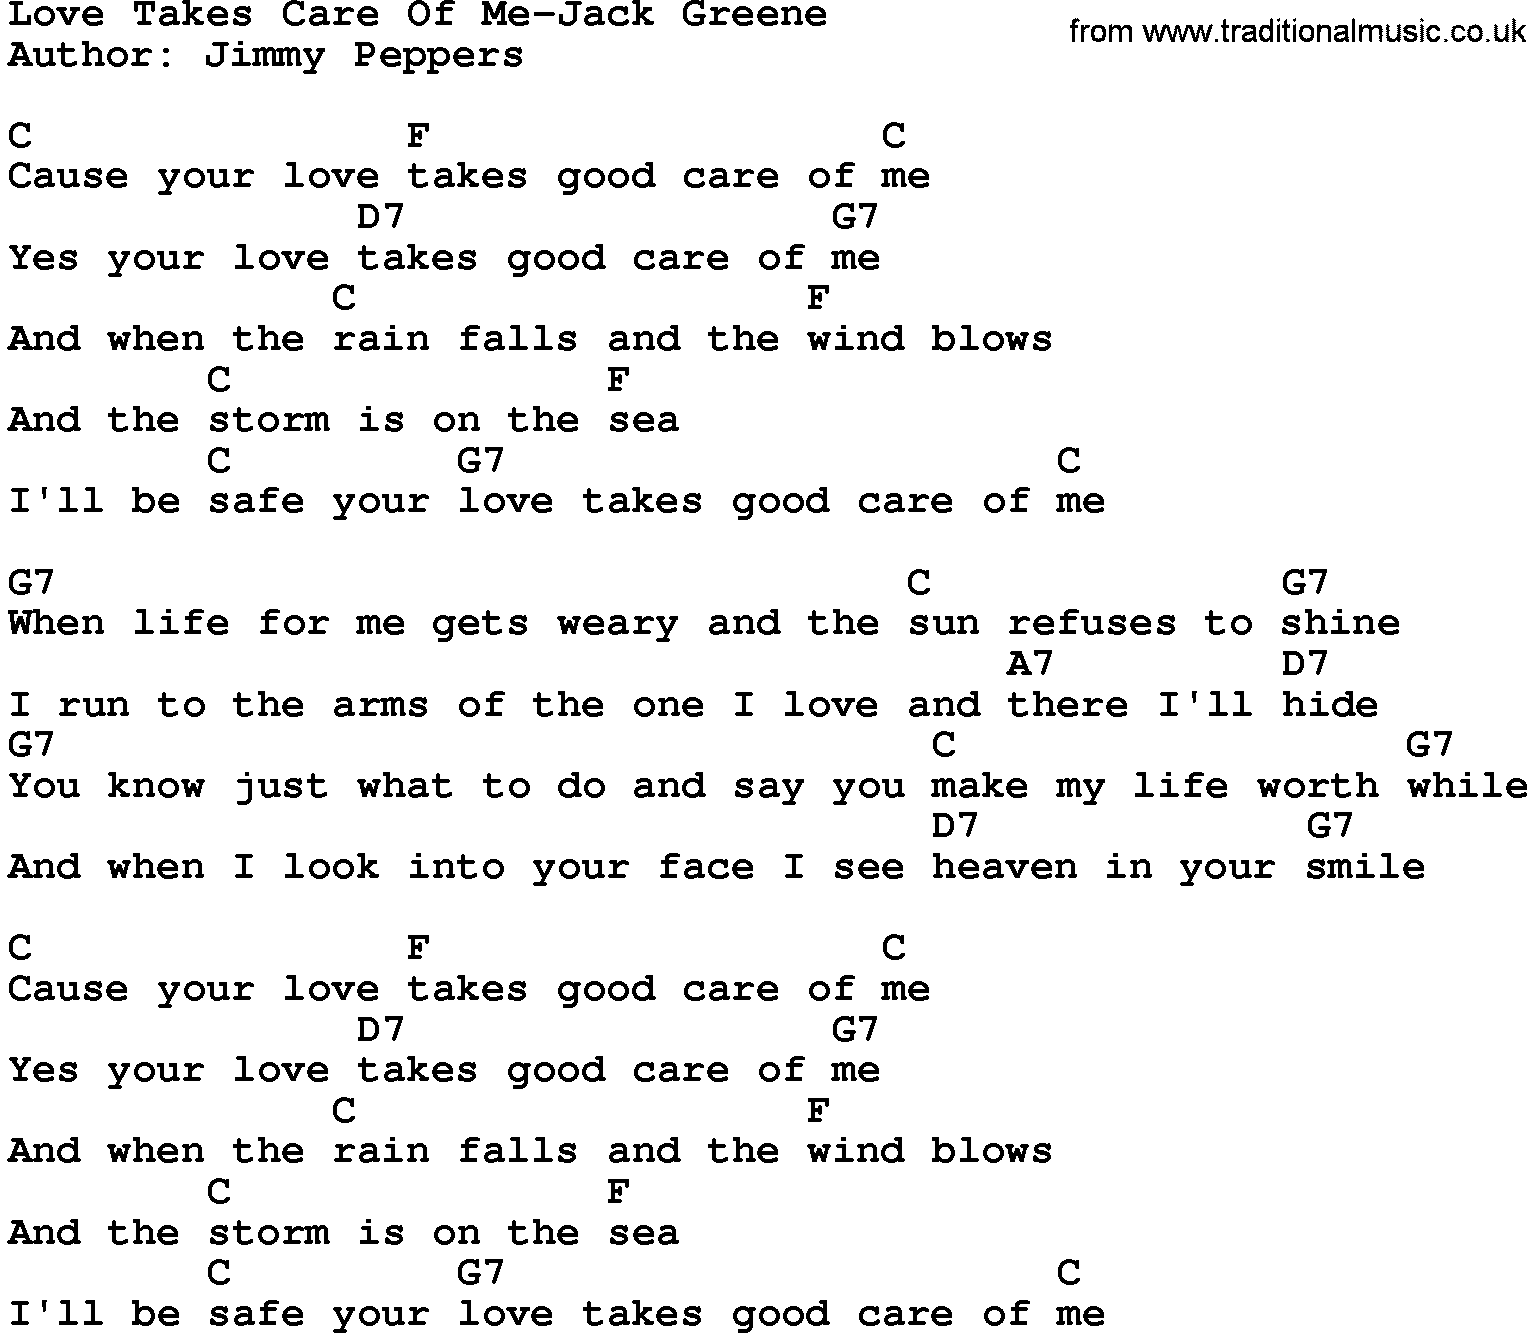 Country music song: Love Takes Care Of Me-Jack Greene lyrics and chords